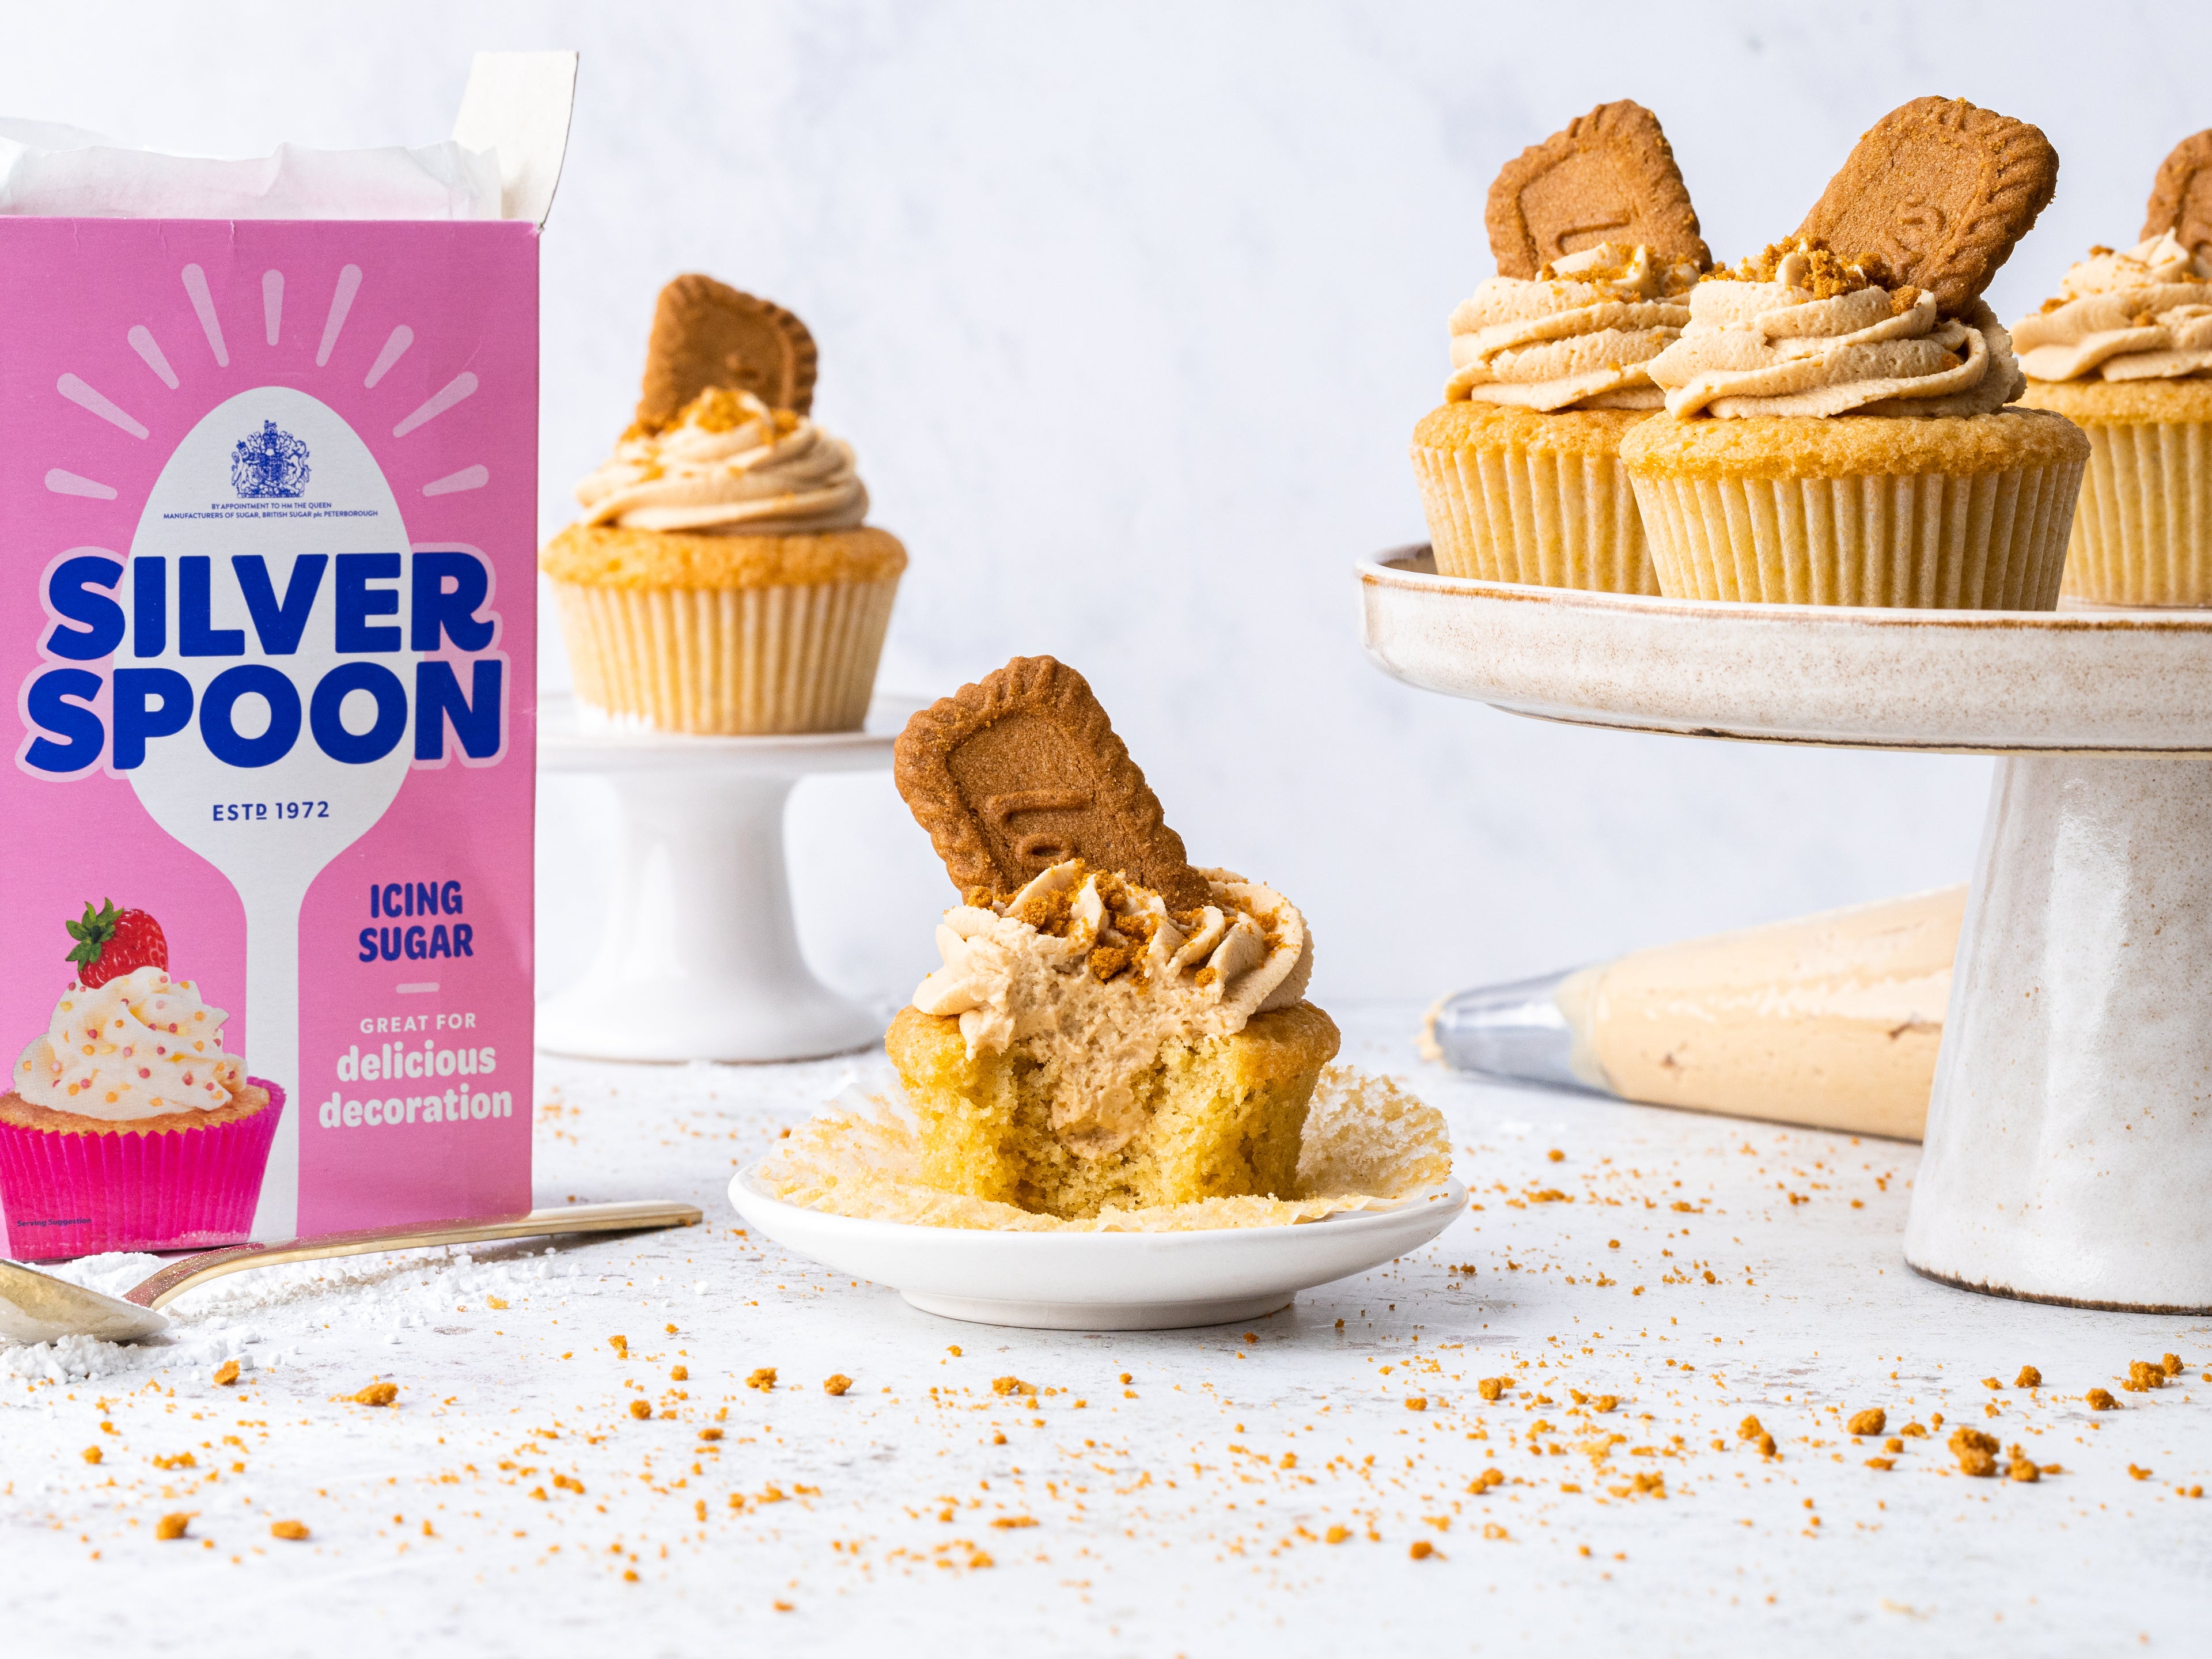 Biscoff cupcake with a bite taken out of it, beside a Silver Spoon sugar pack